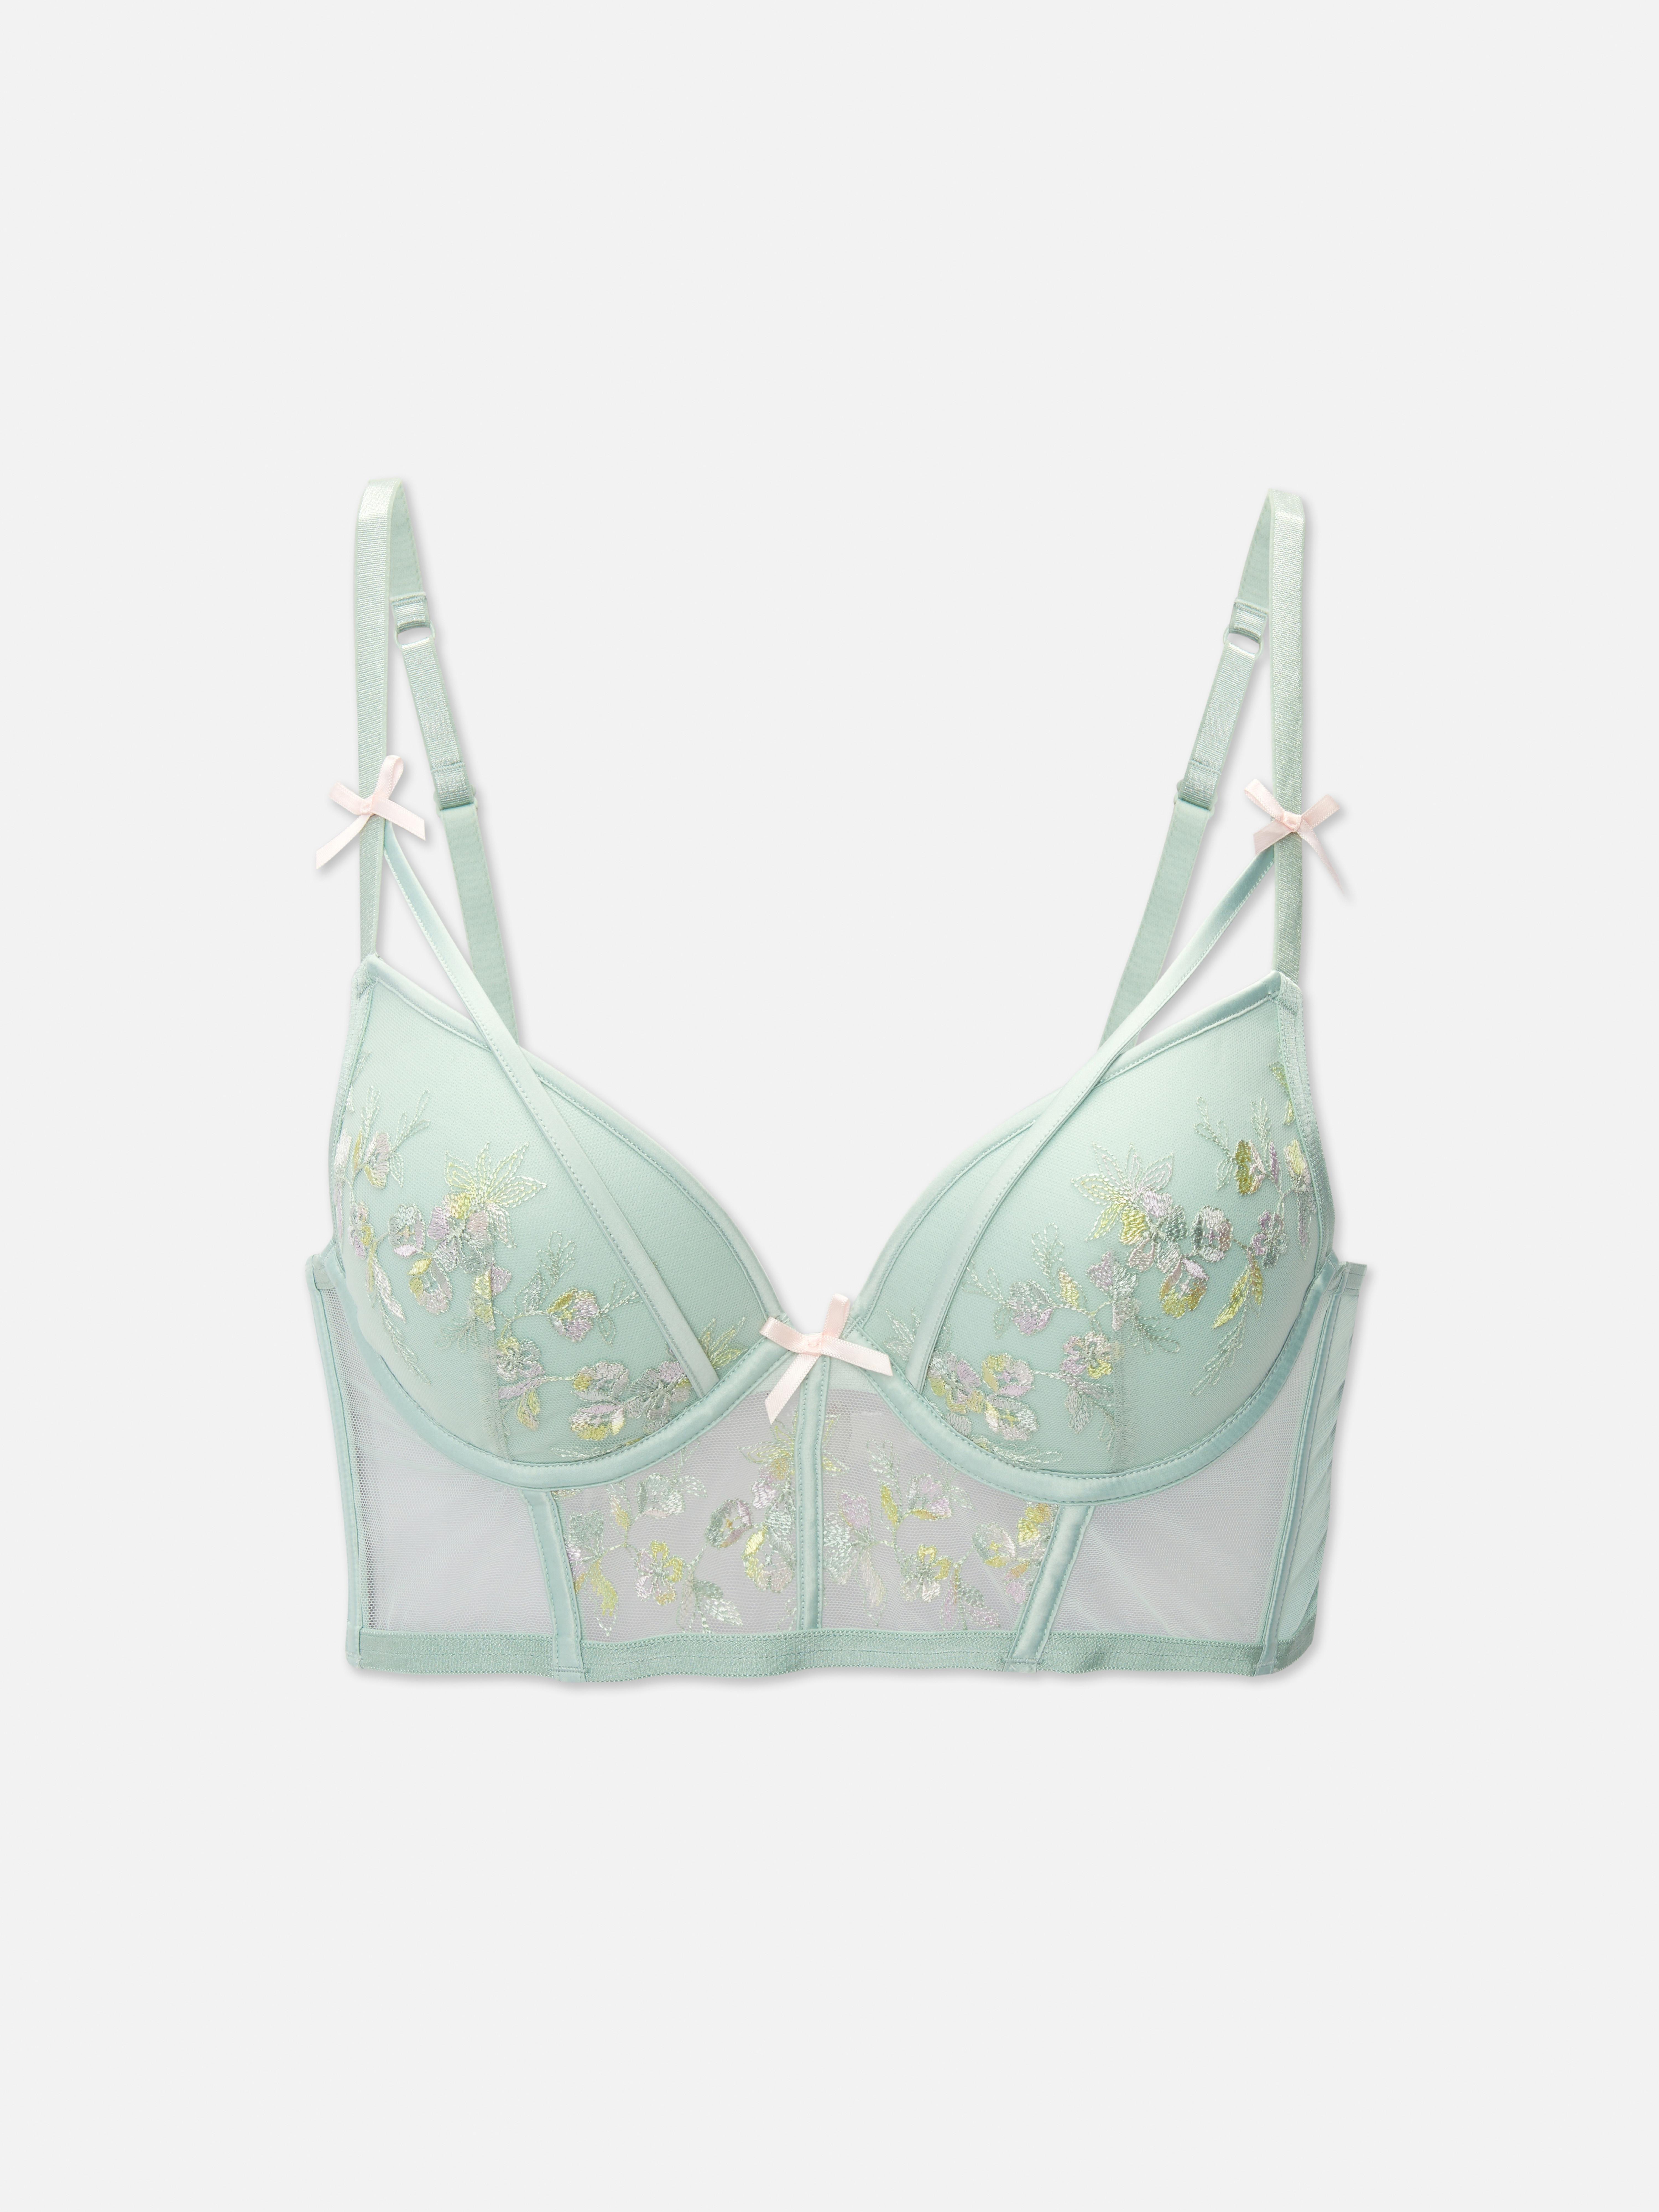 Embroidered Dreams bra - Exclusive embroidery that provides a